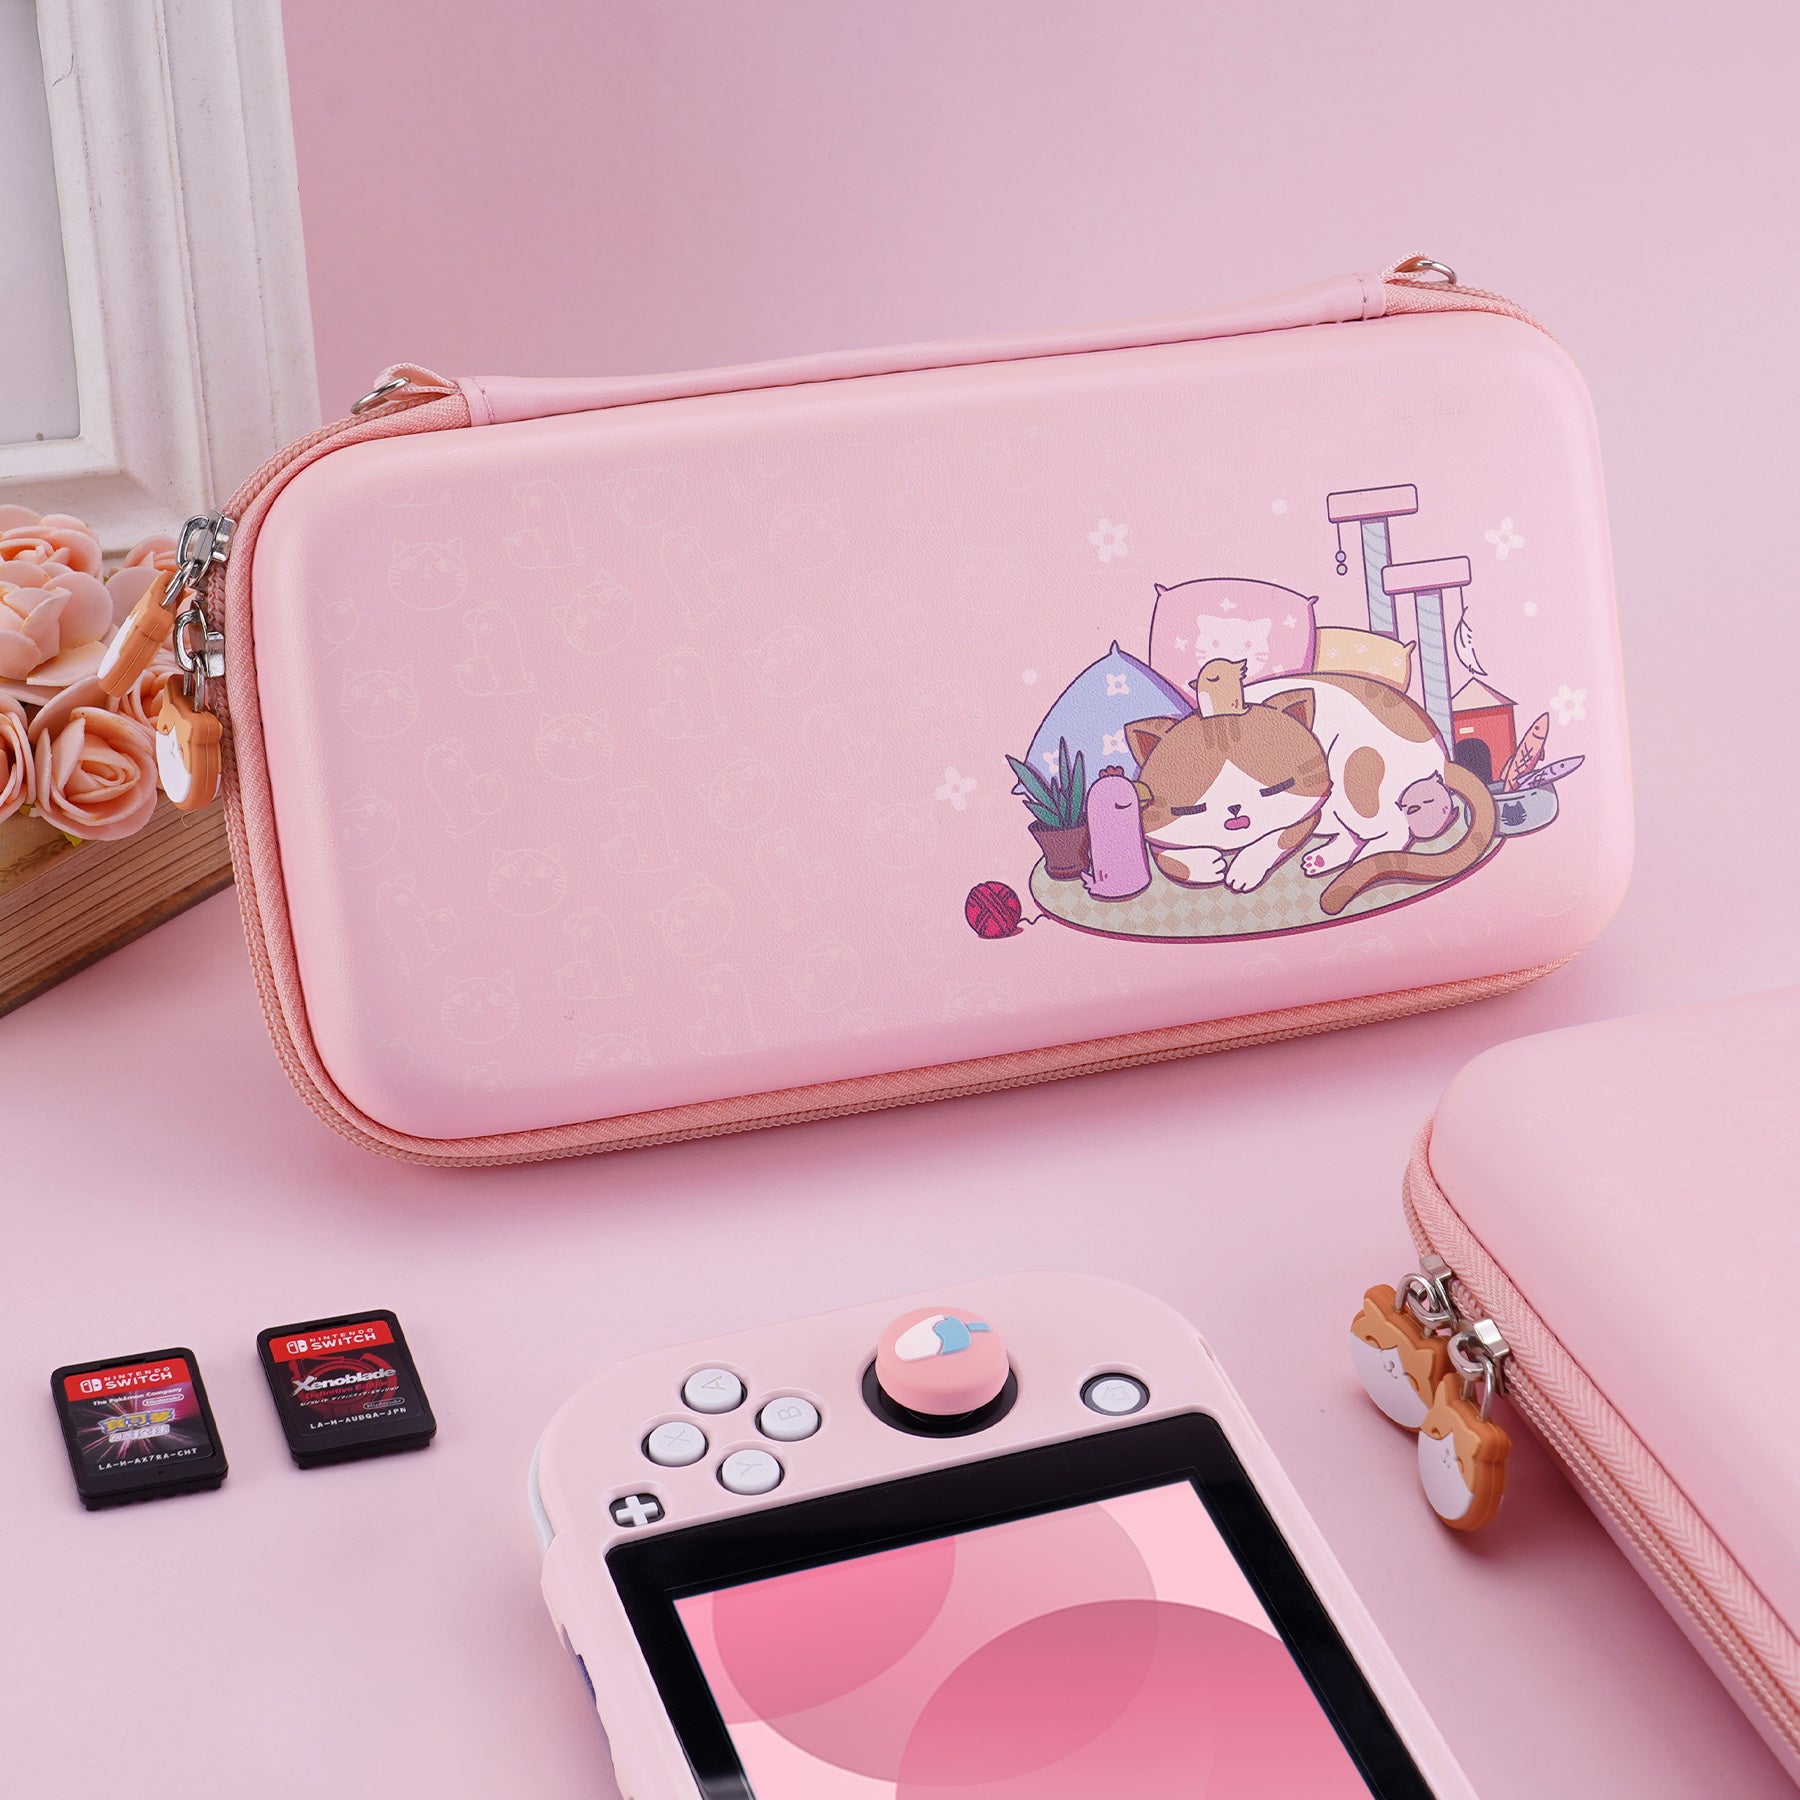 PlayVital Pink Switch Lite Travel Carrying Case, Portable Pouch, Soft Velvet Lining Storage Bag for NS Switch Lite with Thumb Grips 8 Game Cards Slots Inner Pocket - Kitten & Chicken - LTW002 PlayVital